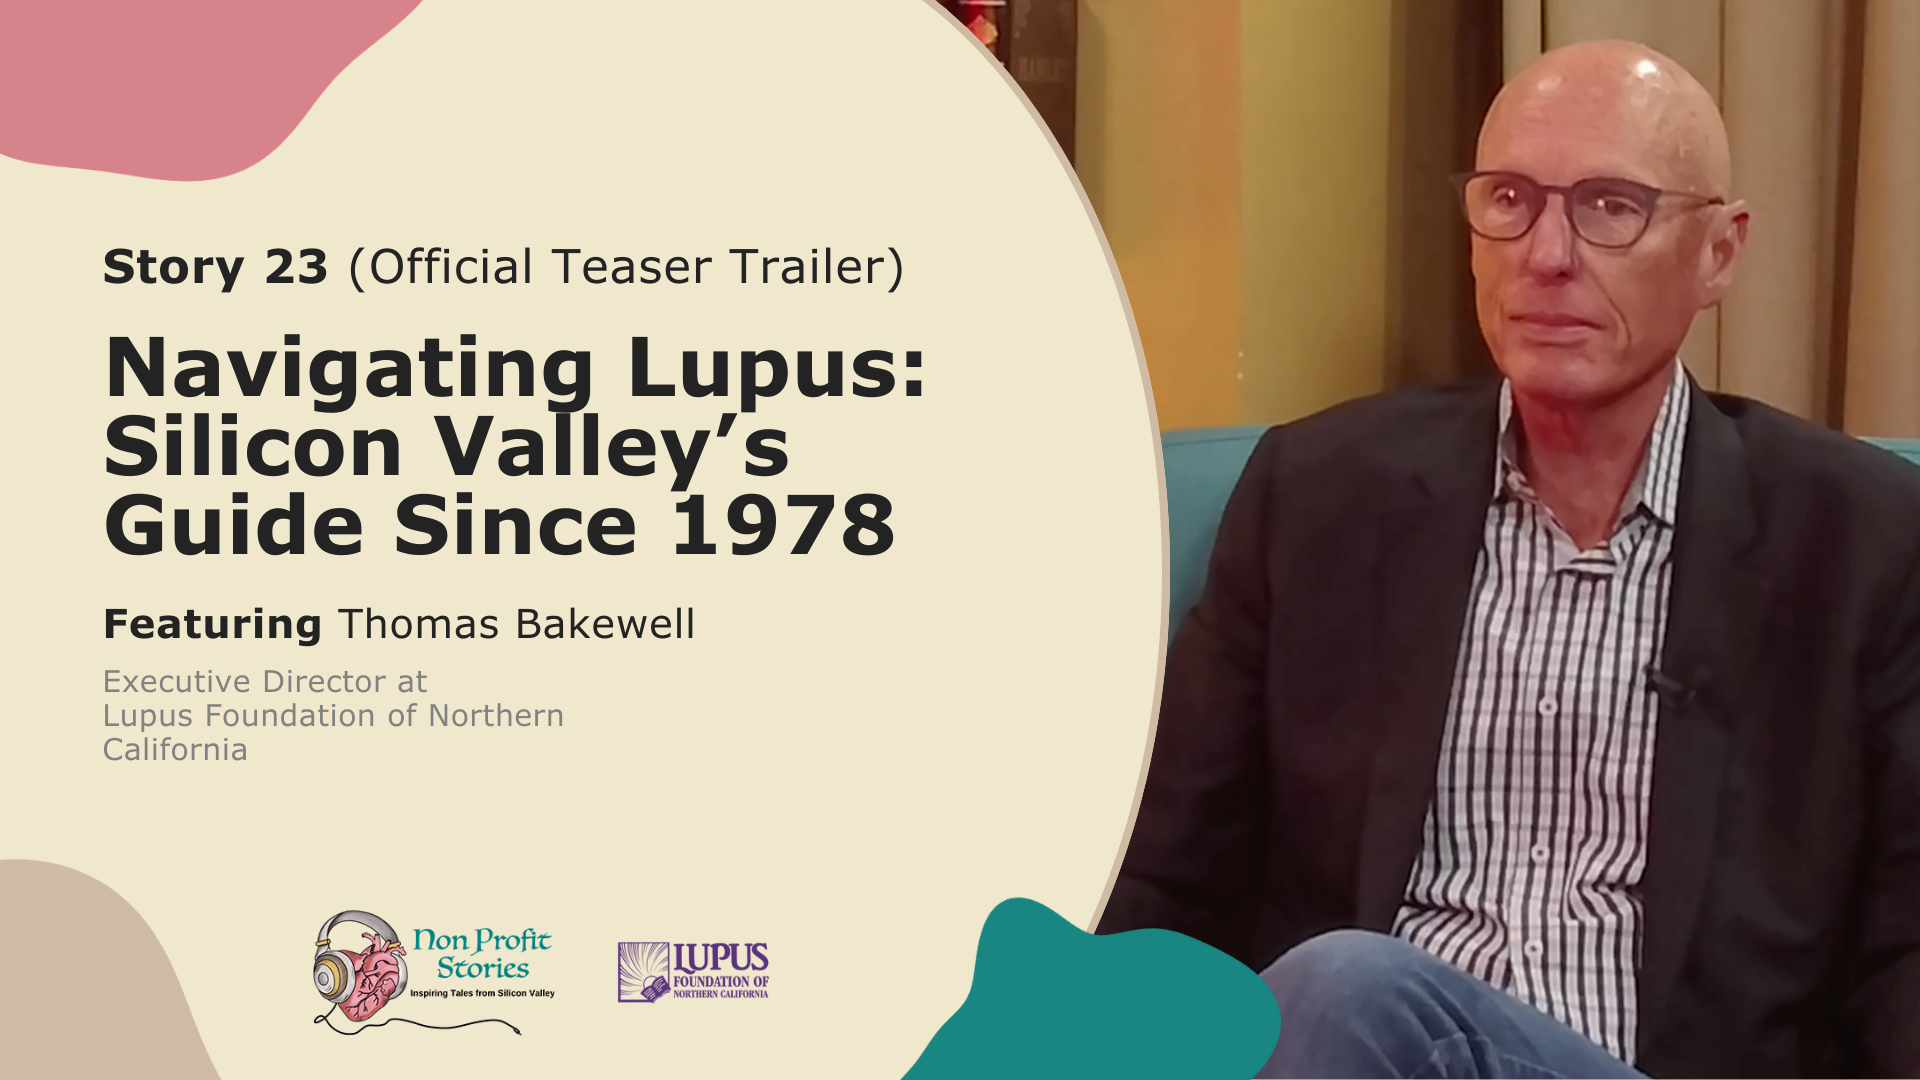 Navigating Lupus: Silicon Valley’s Guide Since 1978 Video